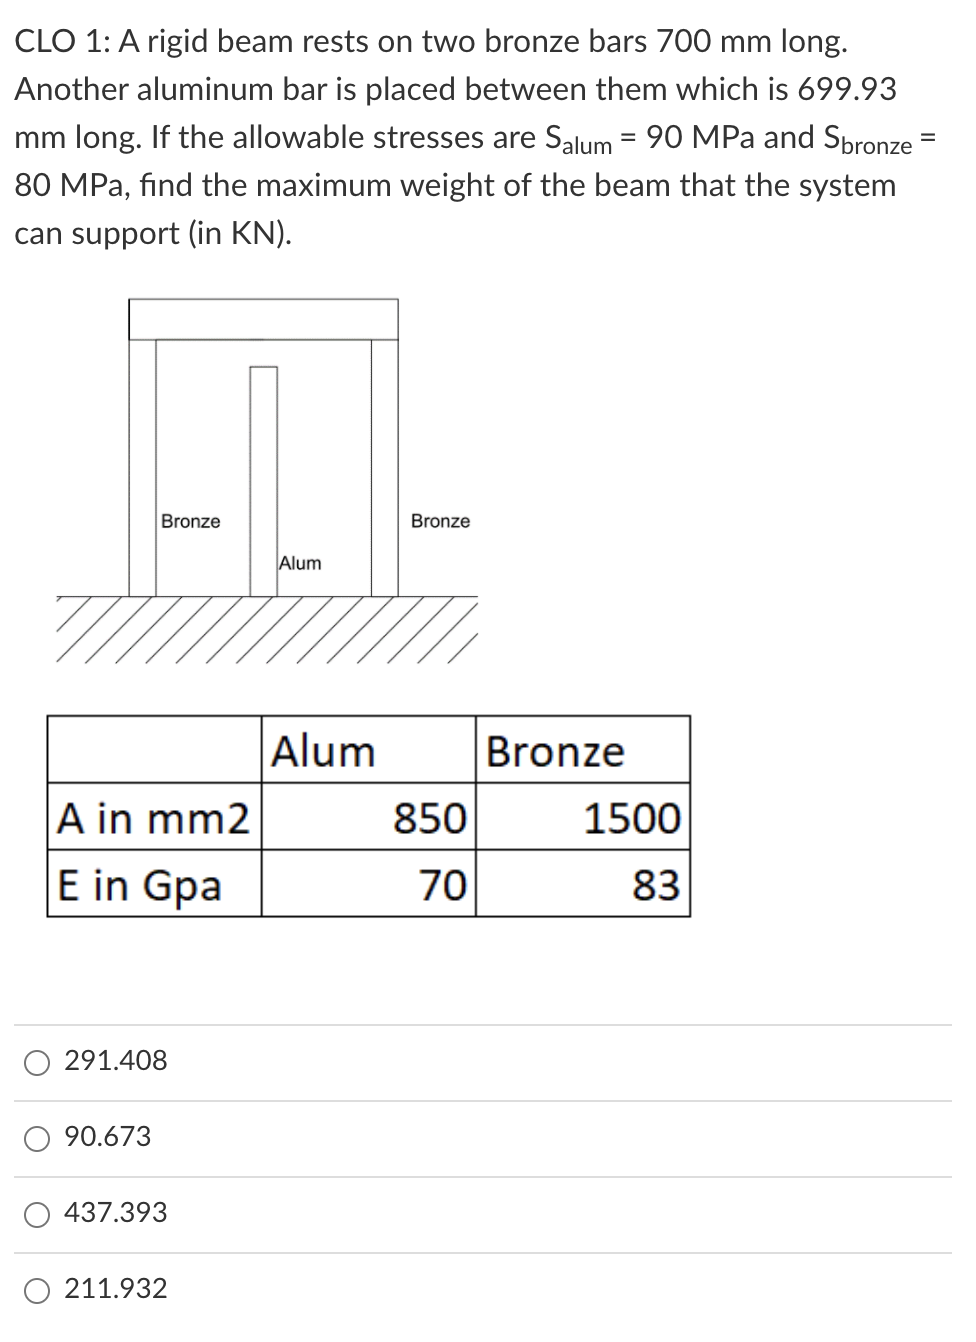 CLO 1: A rigid beam rests on two bronze bars 700 mm long.
Another aluminum bar is placed between them which is 699.93
mm long. If the allowable stresses are Salum = 90 MPa and Spronze
%3D
%D
80 MPa, find the maximum weight of the beam that the system
can support (in KN).
Bronze
Bronze
Alum
Alum
Bronze
A in mm2
850
1500
E in Gpa
70
83
291.408
90.673
437.393
O 211.932
